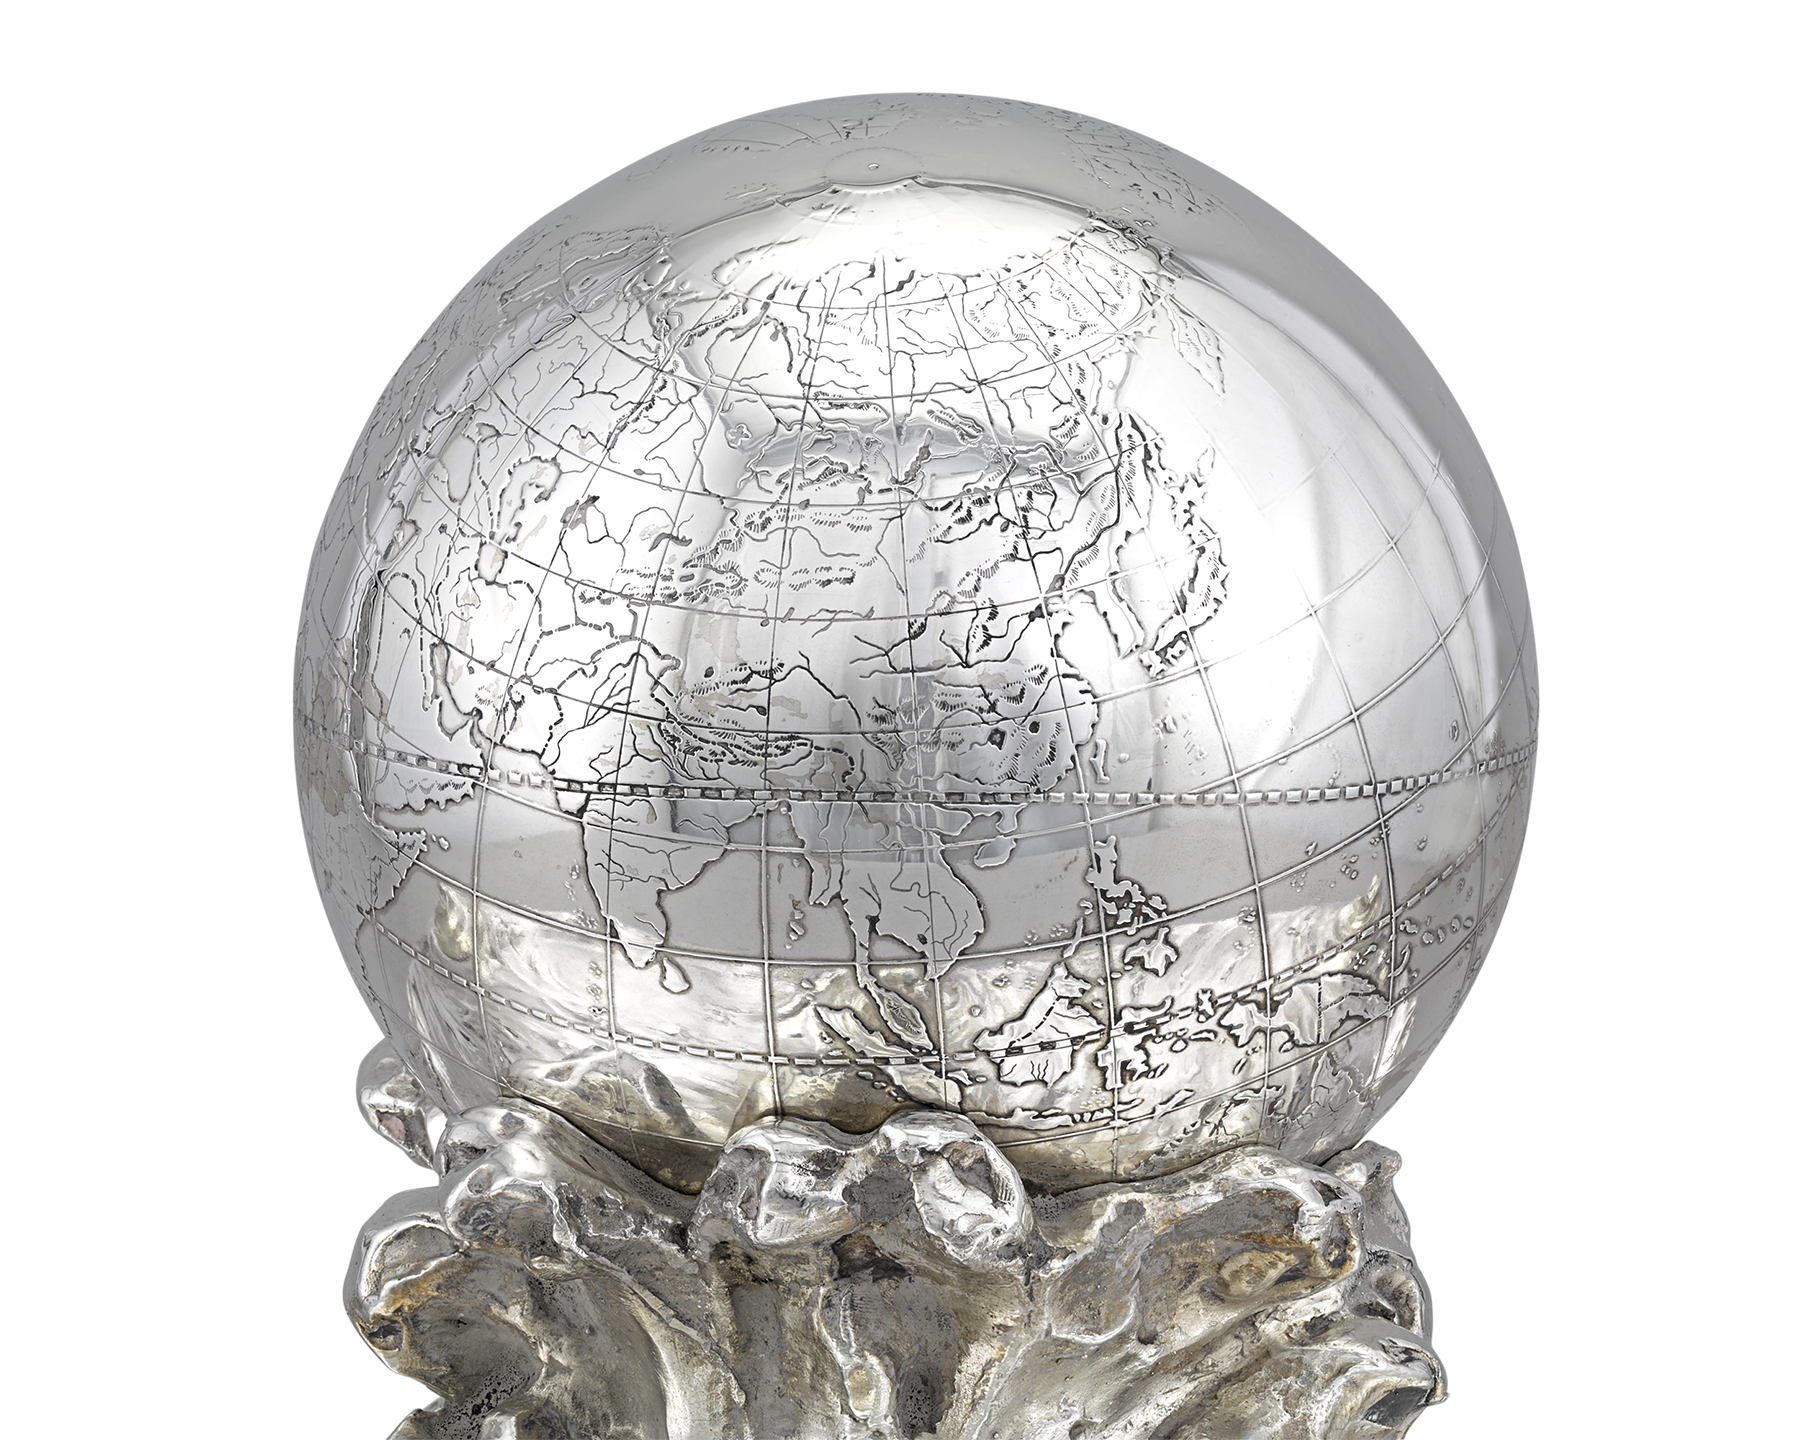 Sterling Silver Globe Inkwell Centerpiece by Tiffany & Co.